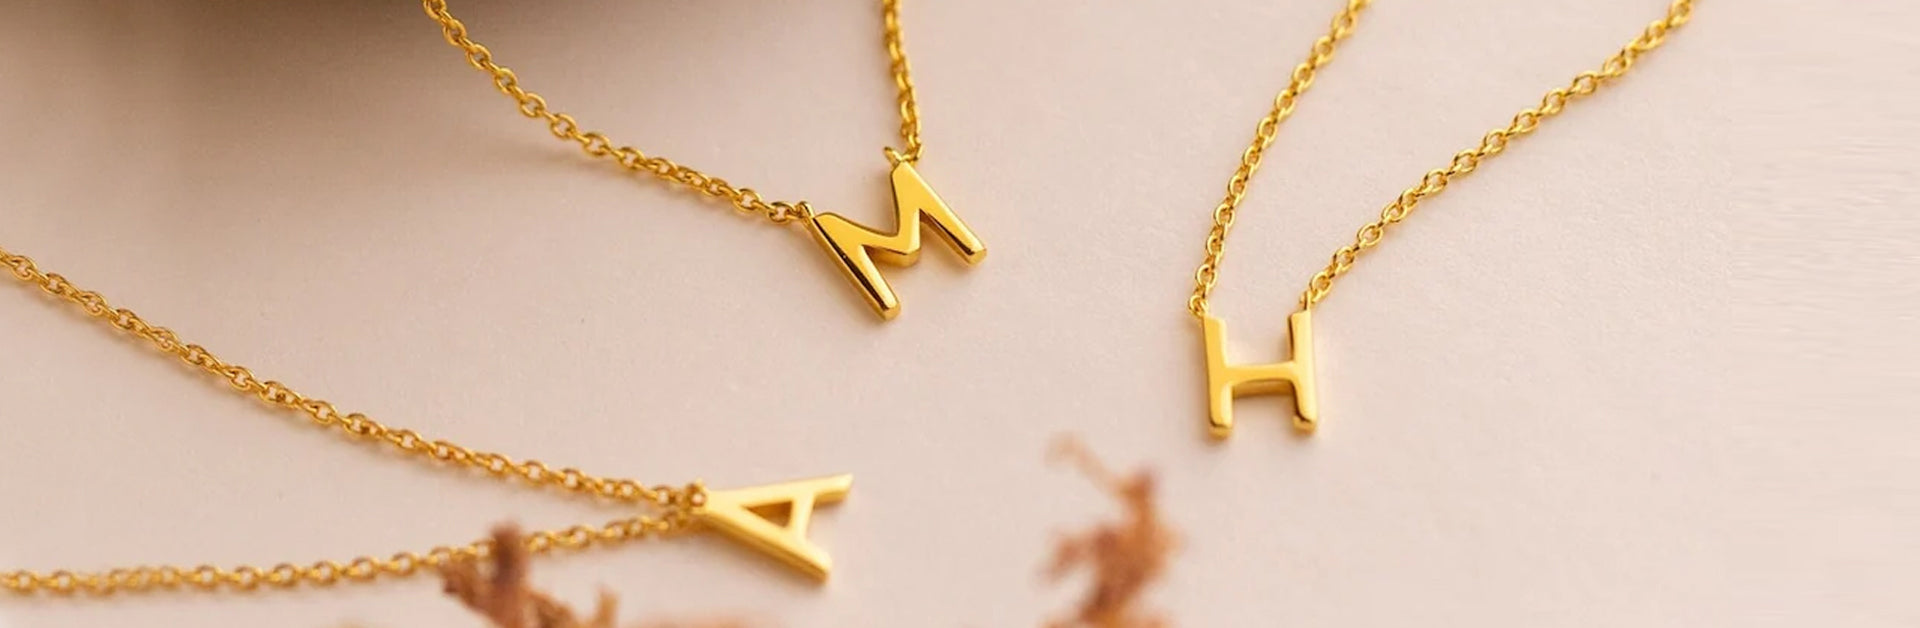 Initial Necklace Fusion: Timeless Letters Meet Modern Trends